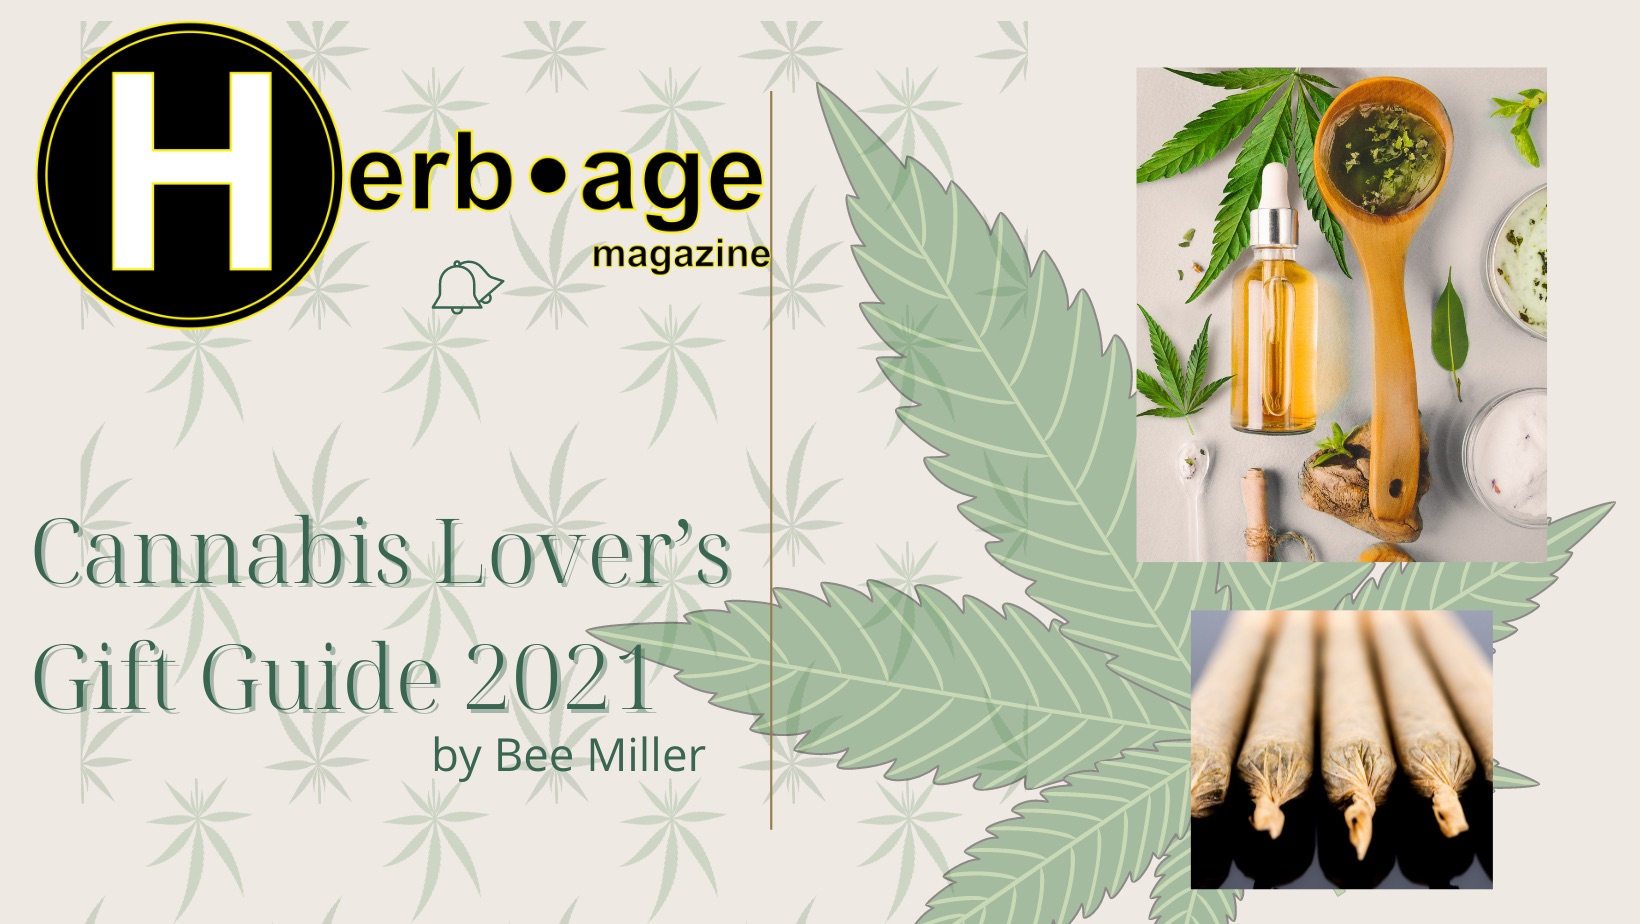 Cannabis-Lover’s Gift Guide 2021